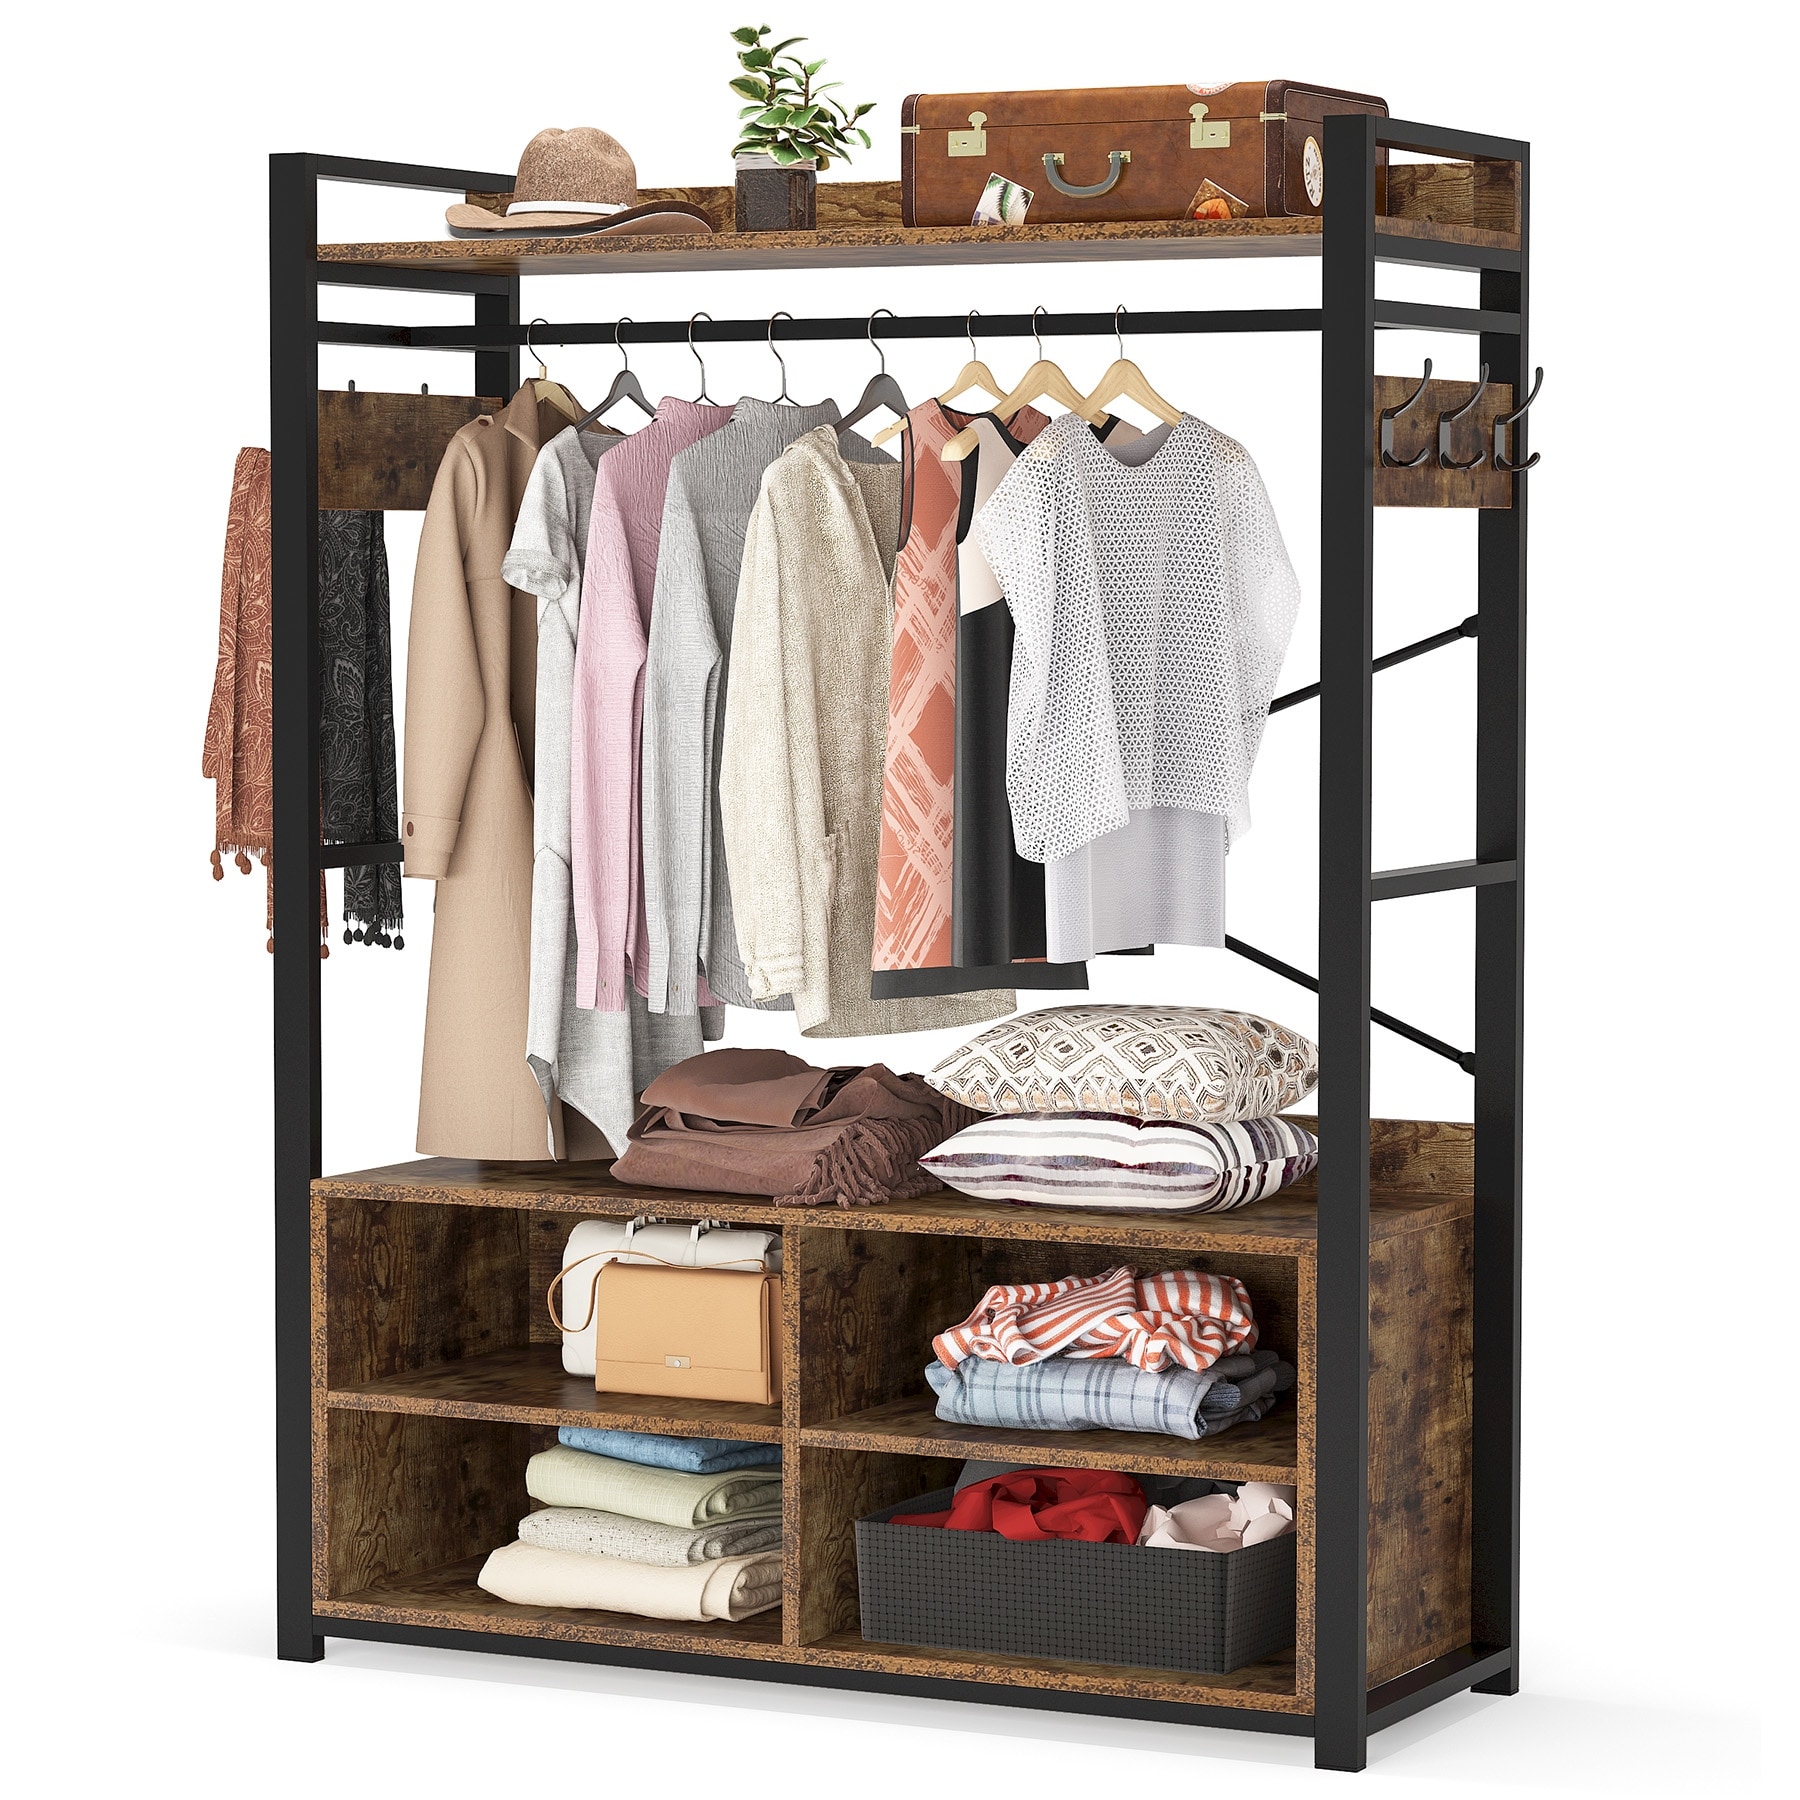 https://ak1.ostkcdn.com/images/products/is/images/direct/3546de438b6a0c8374e3e7ef3ee6150813ea3b5b/Metal-Wood-Free-standing-Closet-Clothing-Rack-Closet-Organizer-System-with-Shelves-Clothes-Garment-Rack-Shelving-for-Bedroom.jpg